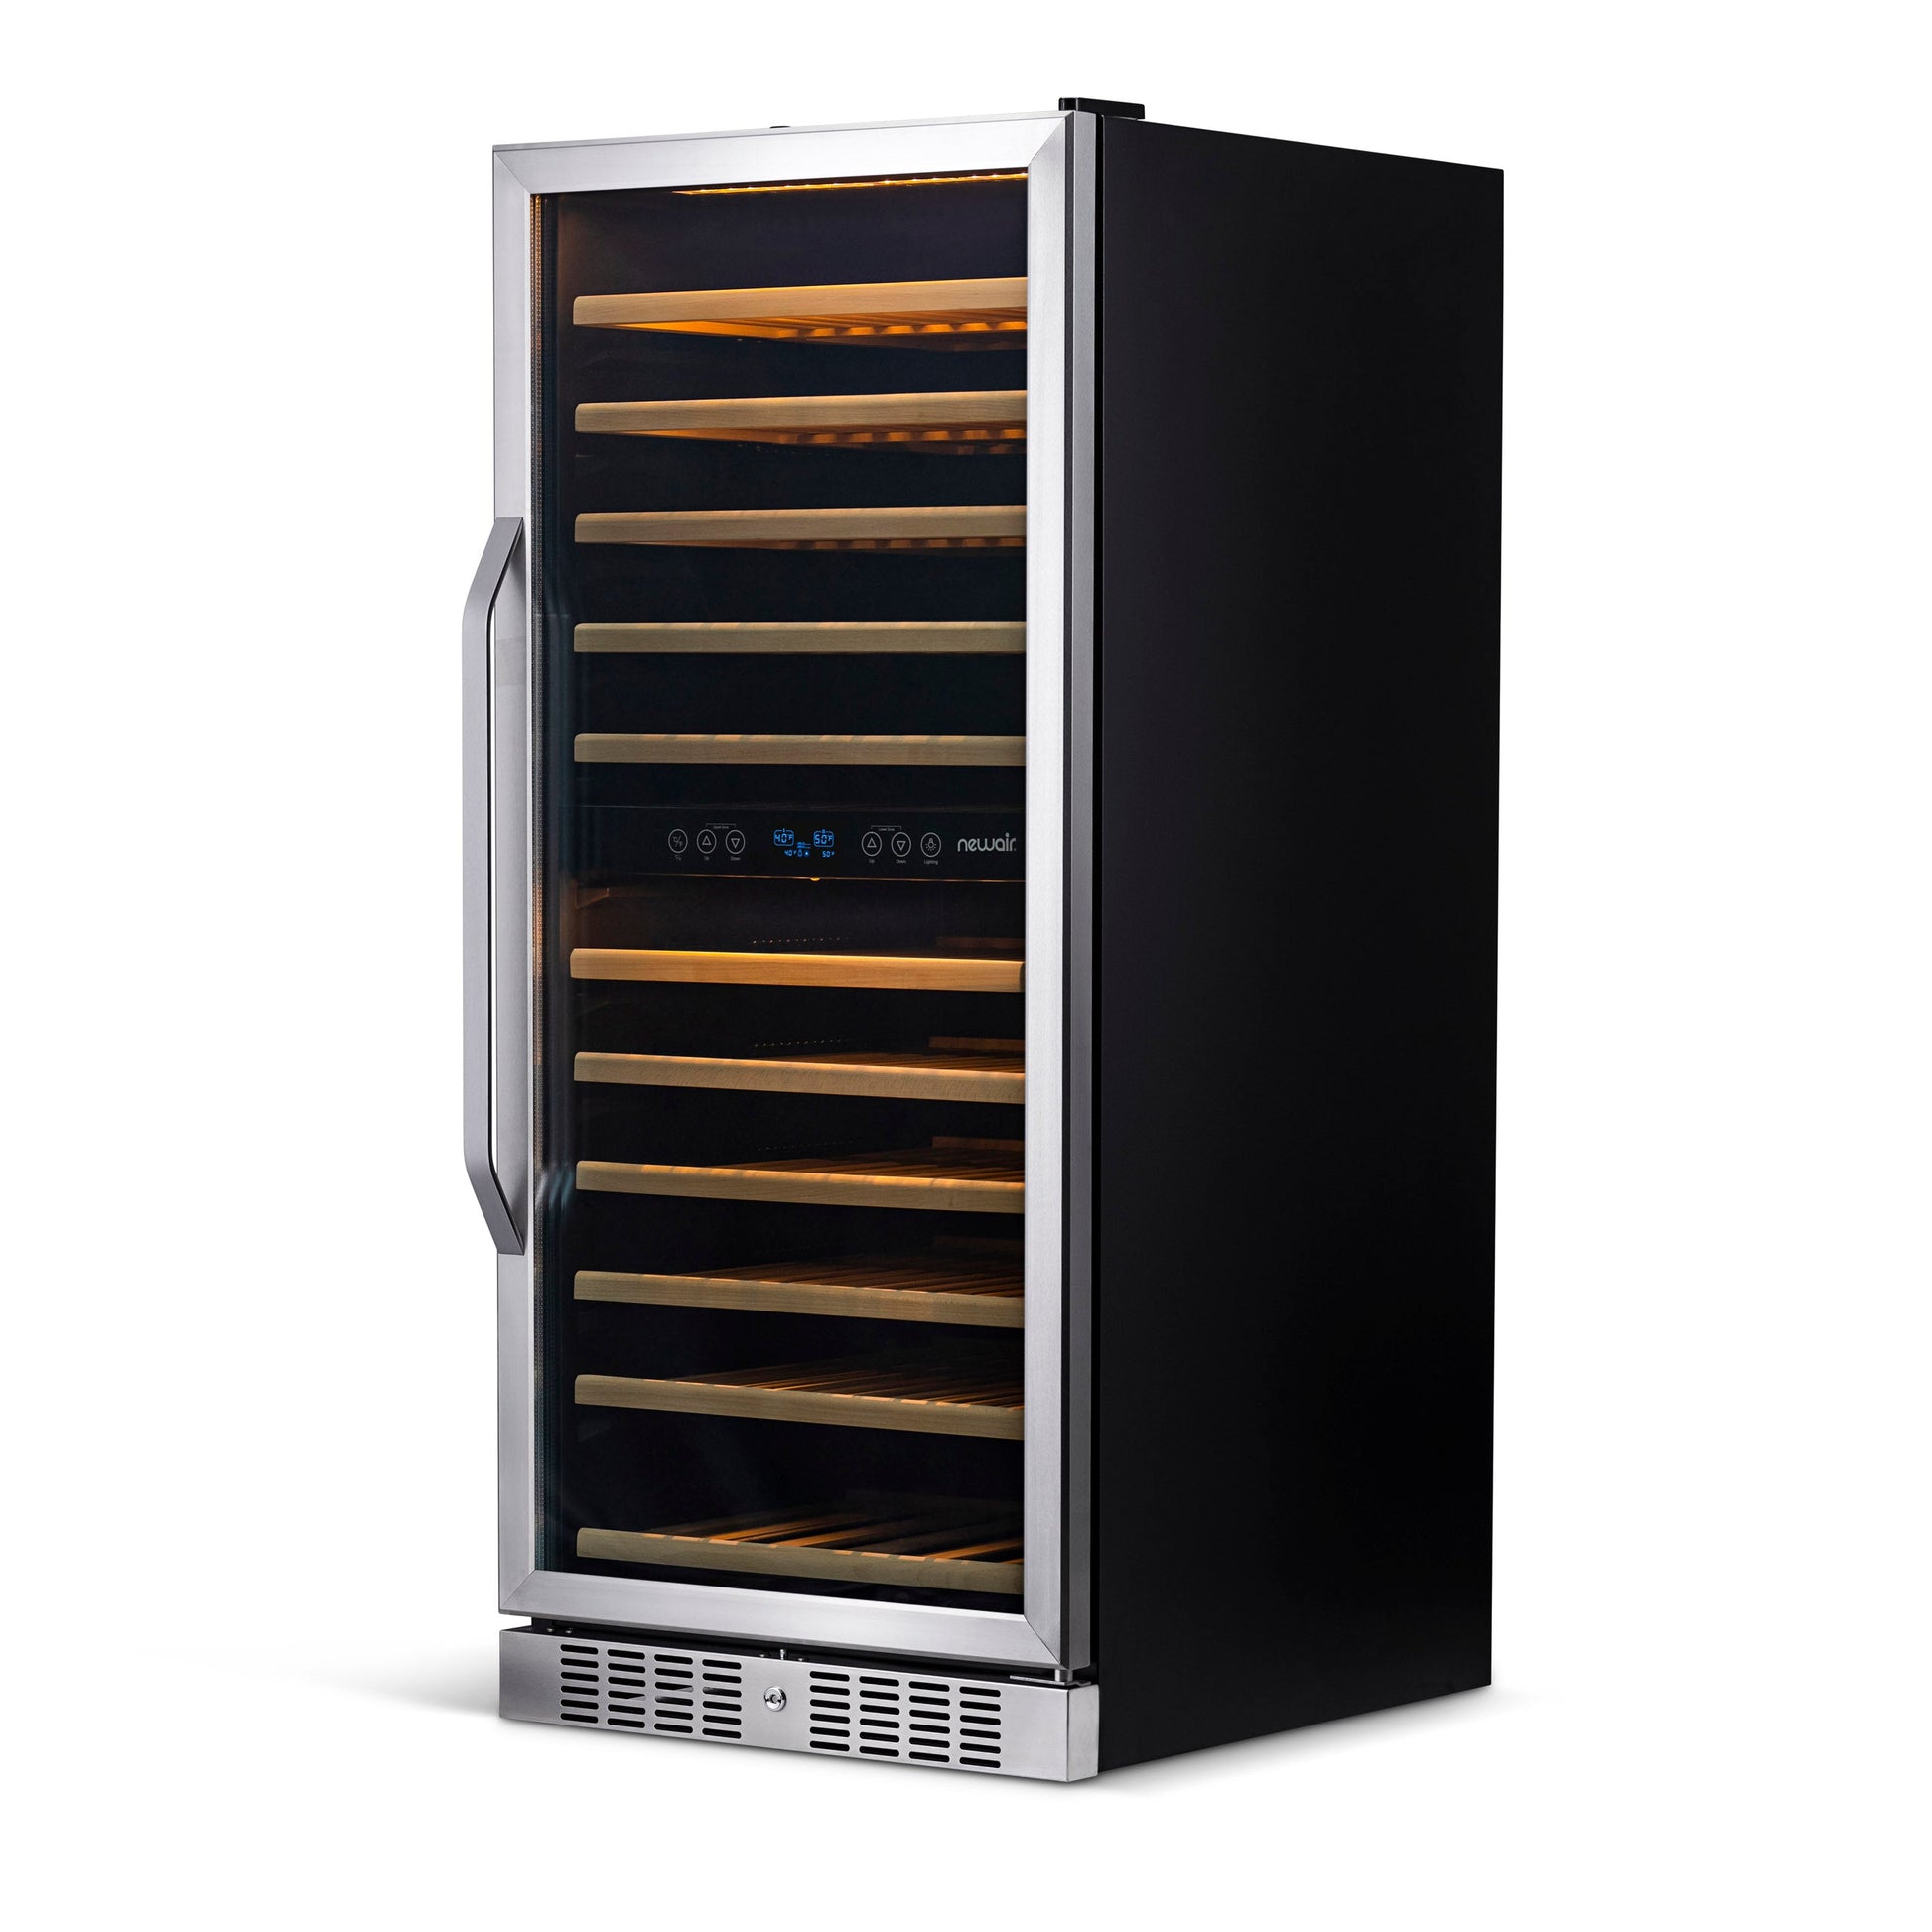 Newair 24” Built-in 116 Bottle Dual Zone Compressor Wine Fridge in Stainless Steel, Quiet Operation with Smooth Rolling Shelves